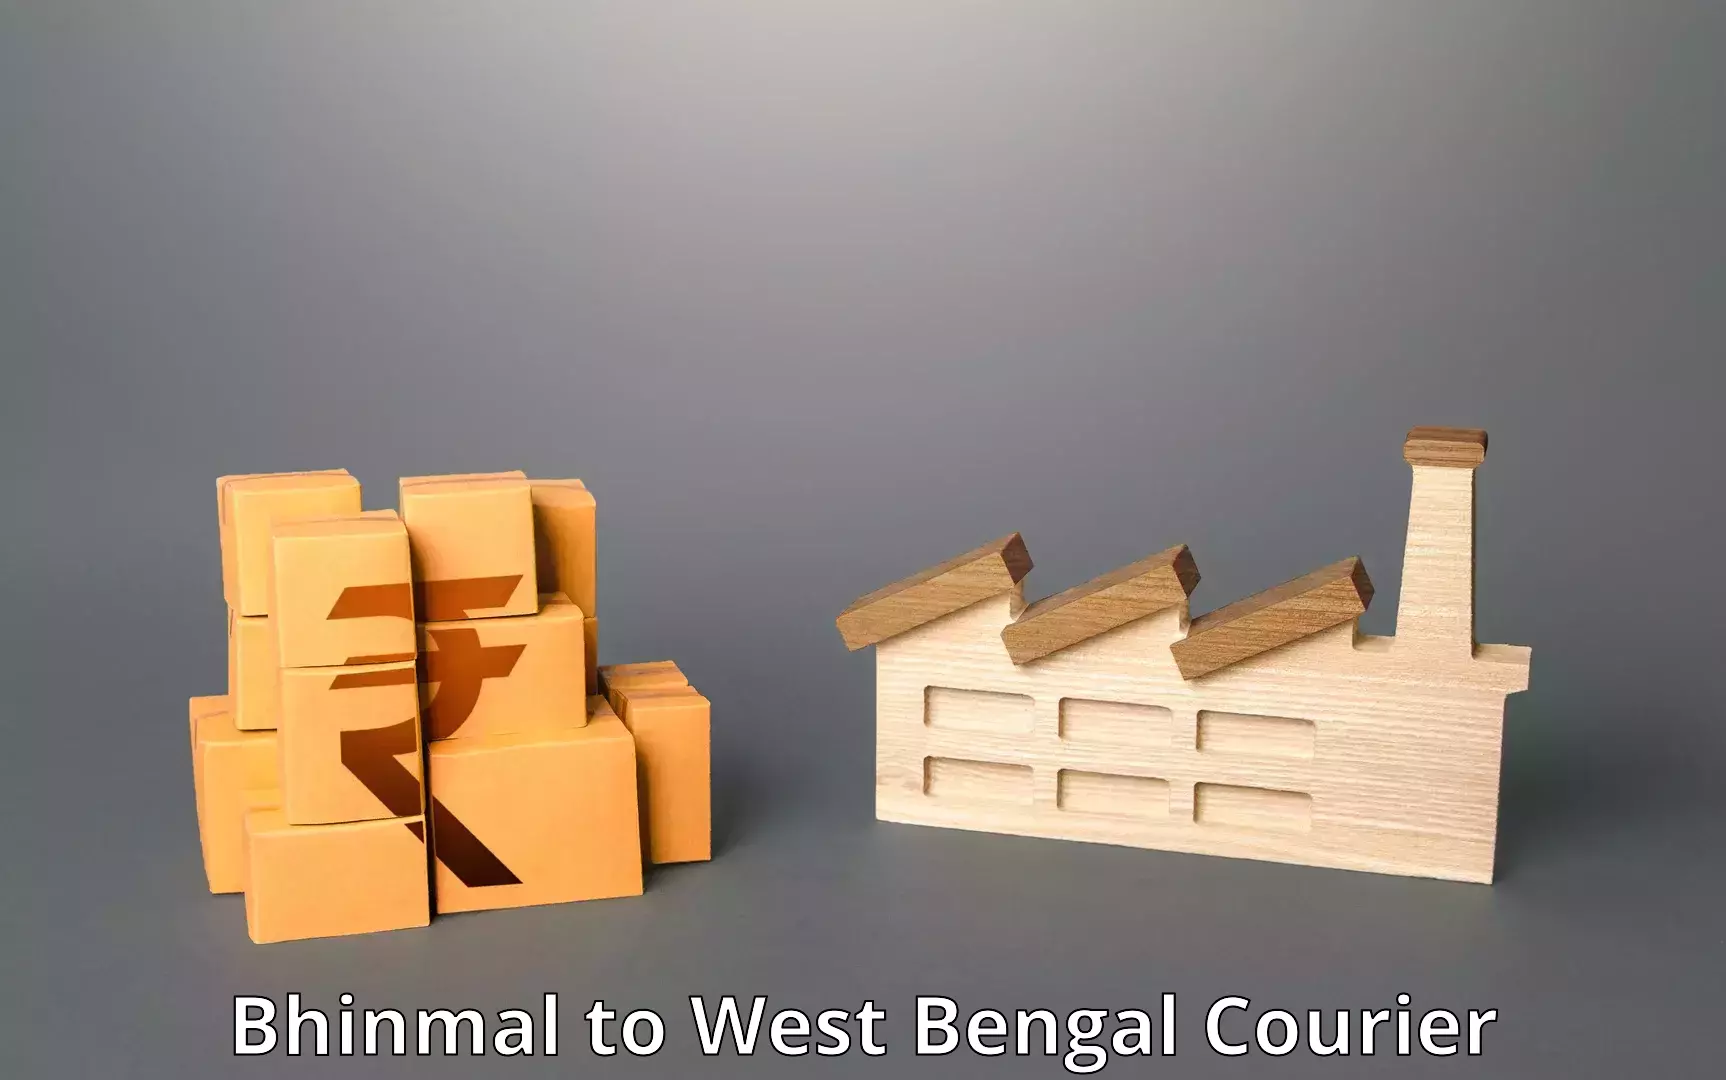 Delivery service partnership Bhinmal to West Bengal